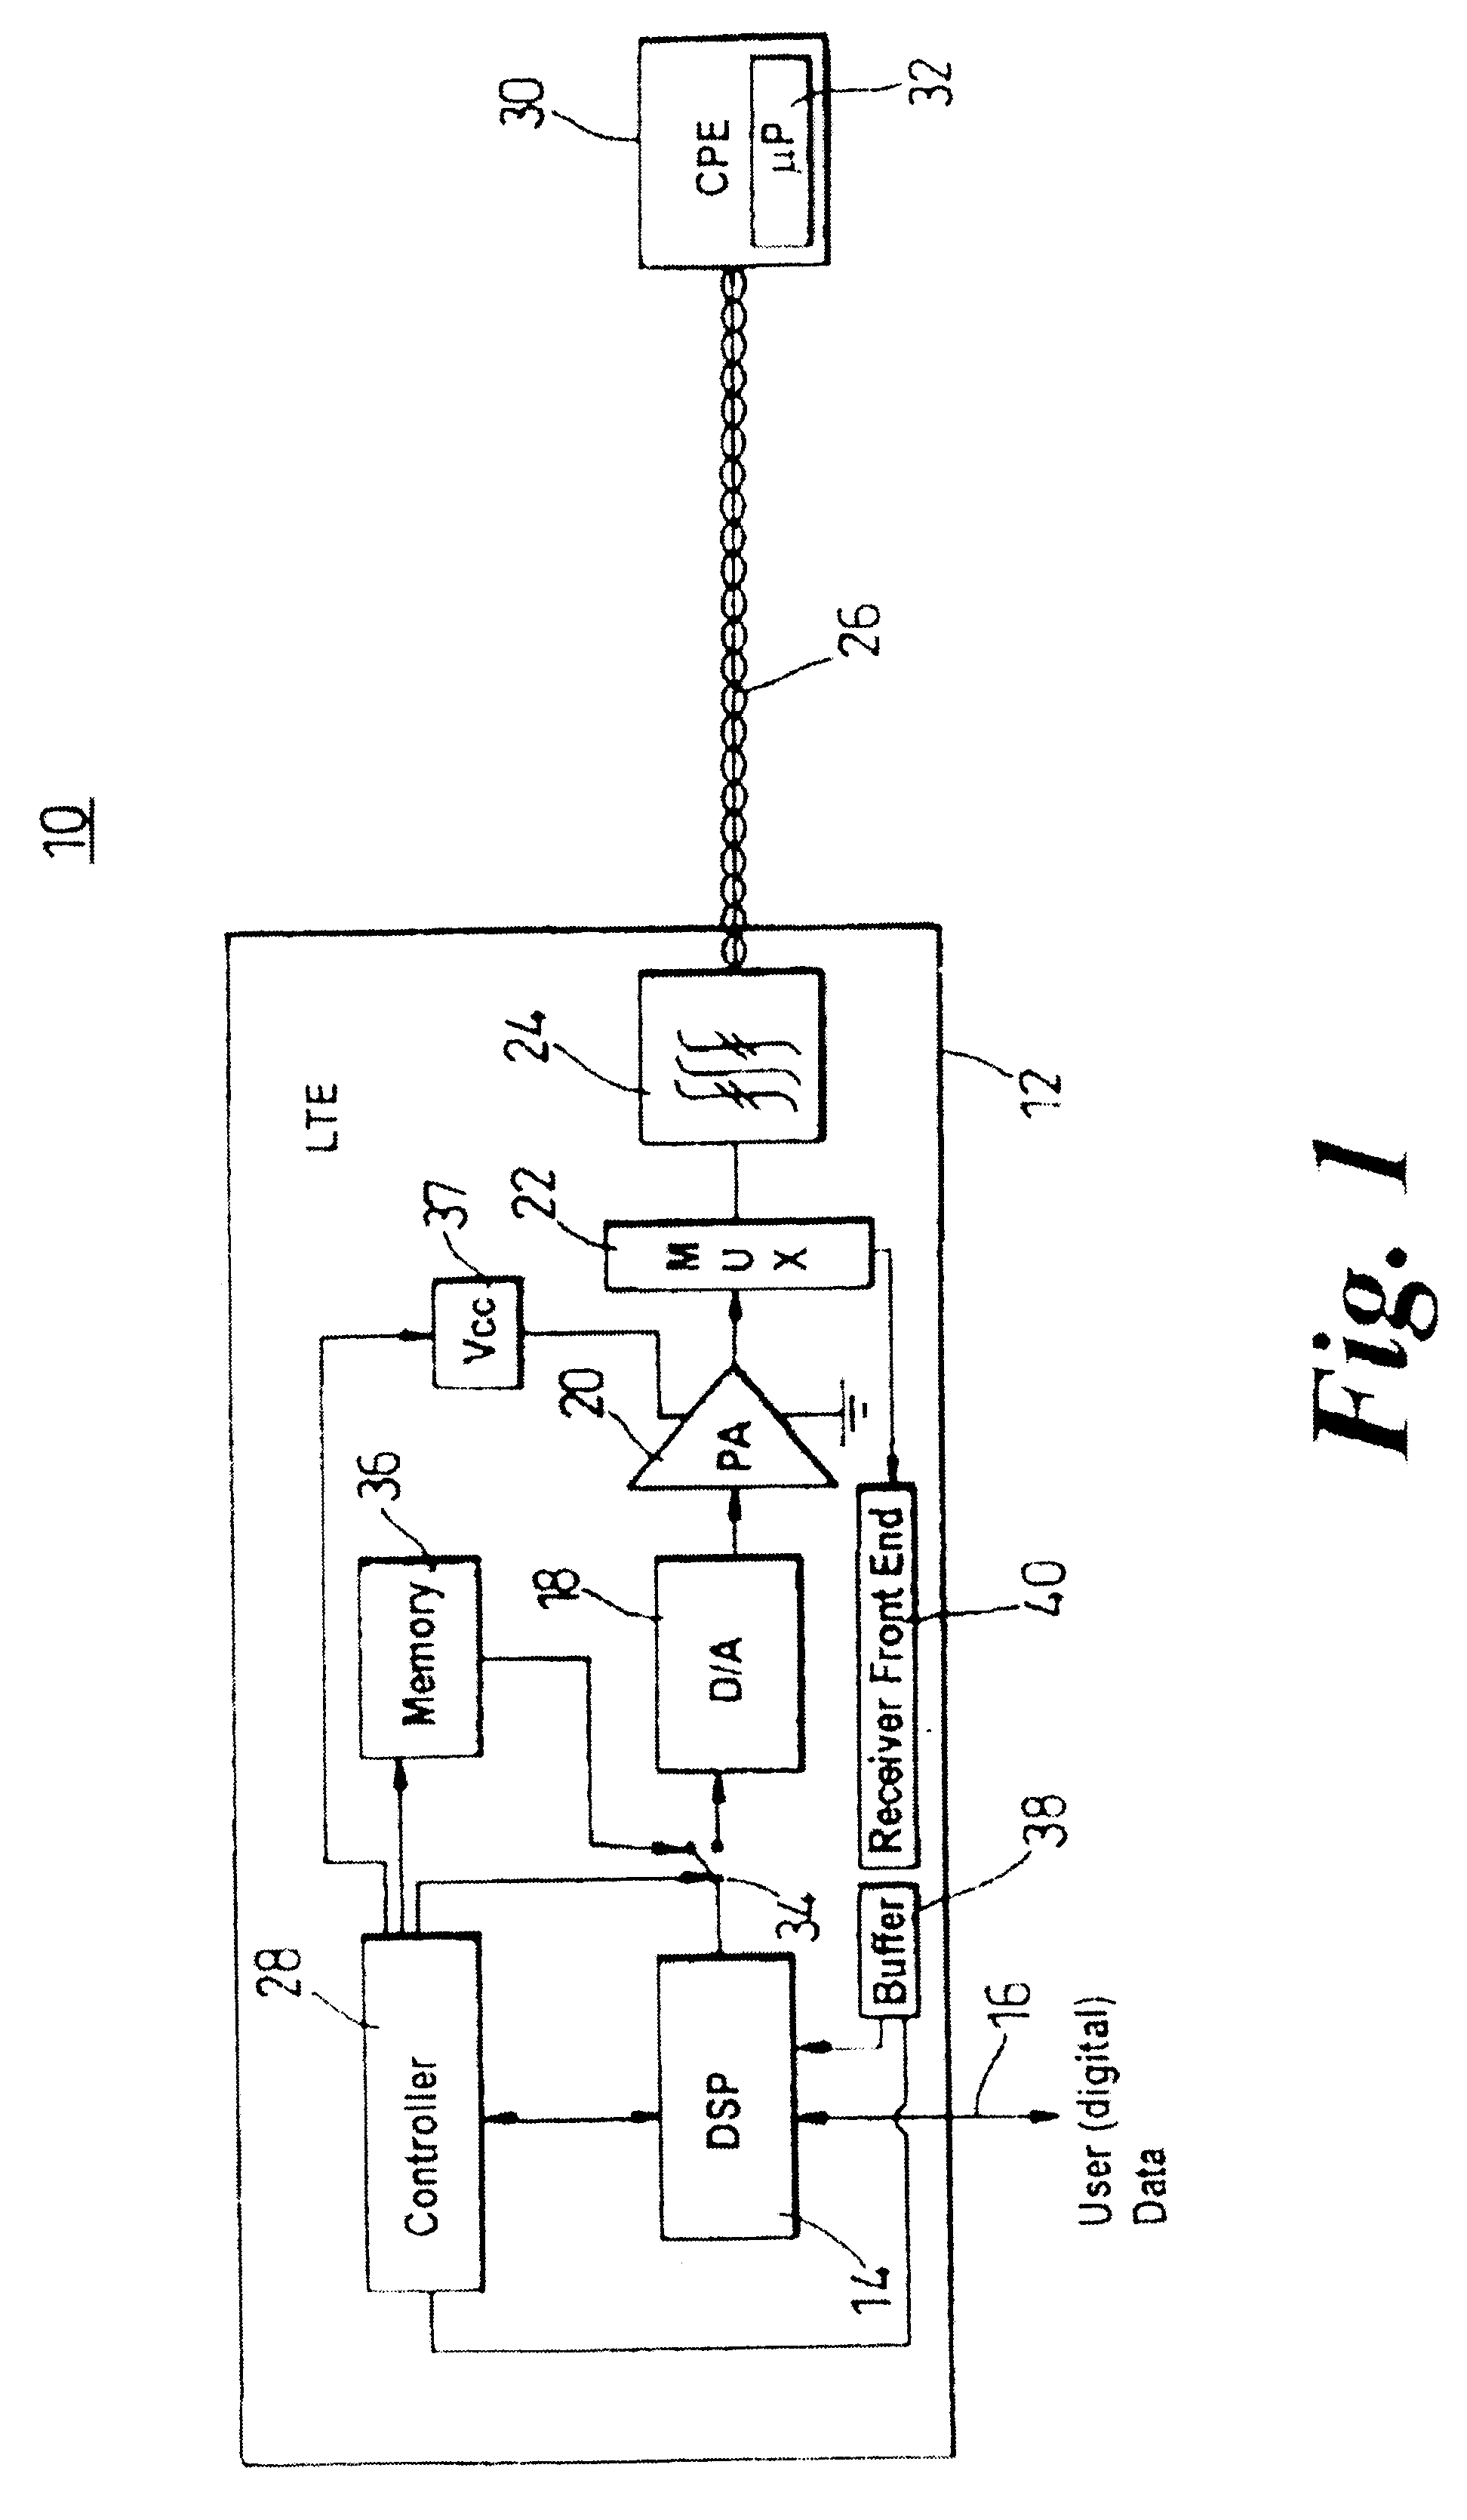 Apparatus, method and system having reduced power consumption in a multi-carrier wireline environment